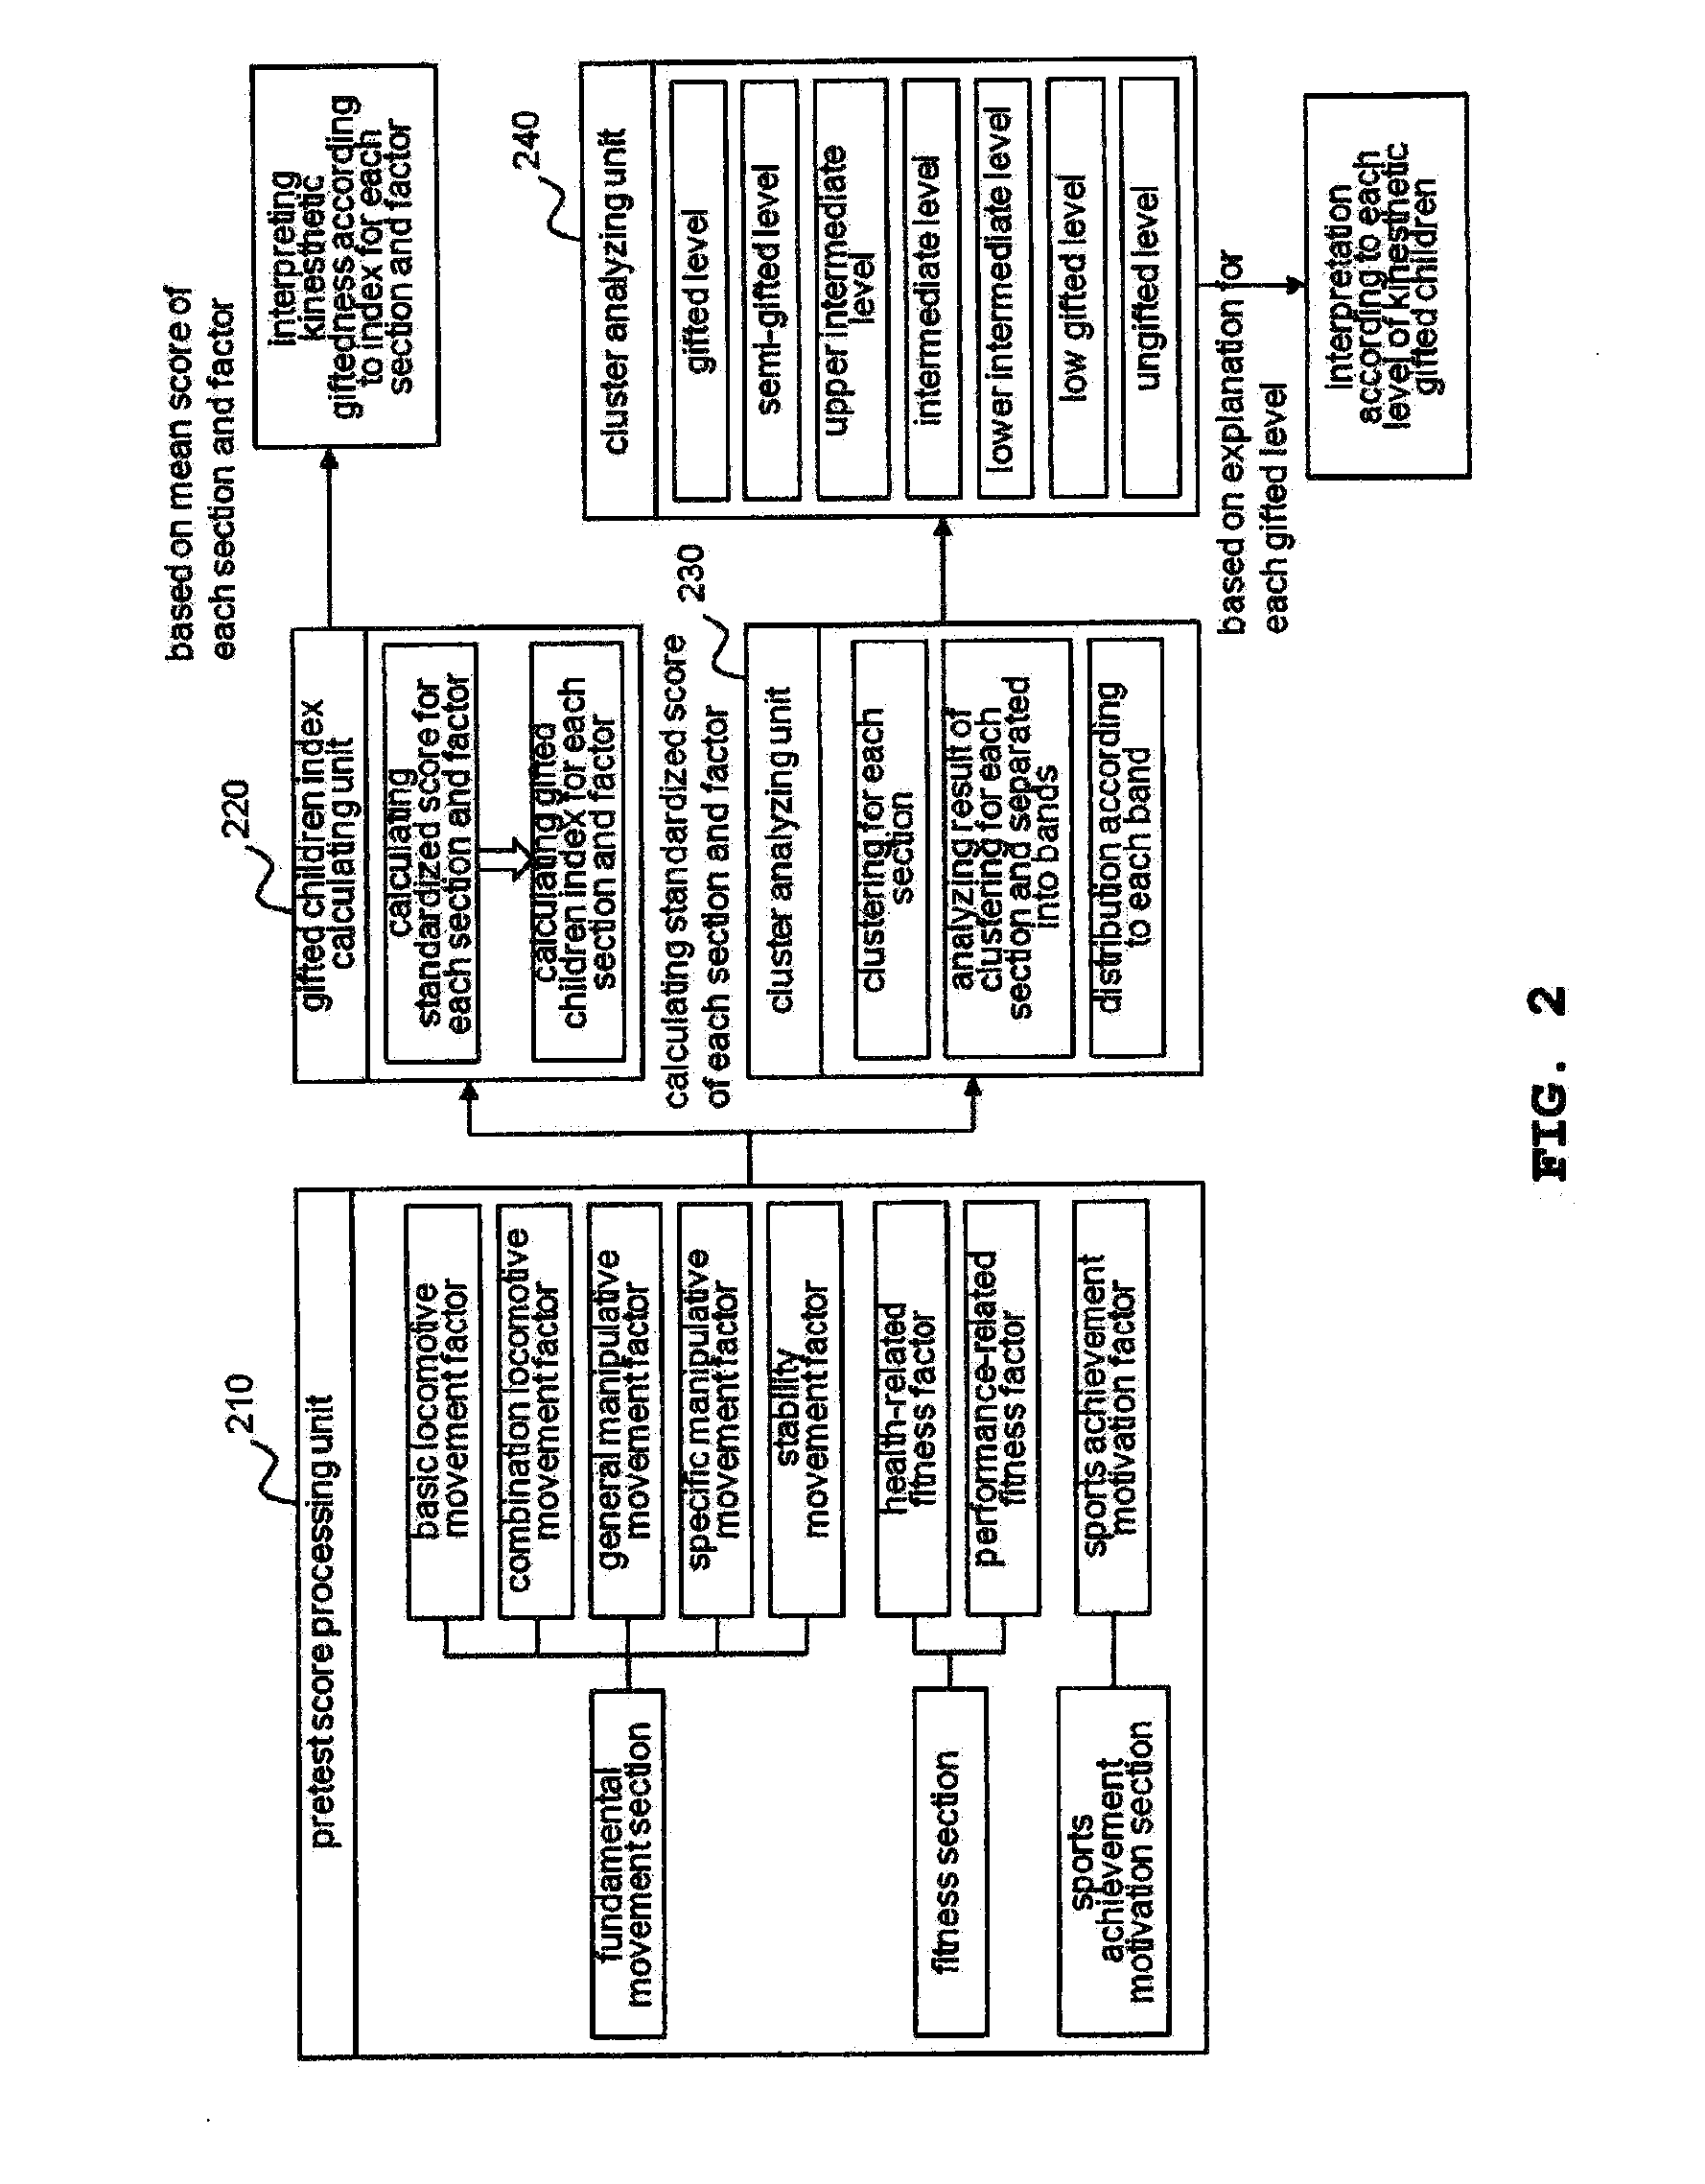 Method for Indexation and Level Classification of Kinesthetic Gifted Infants